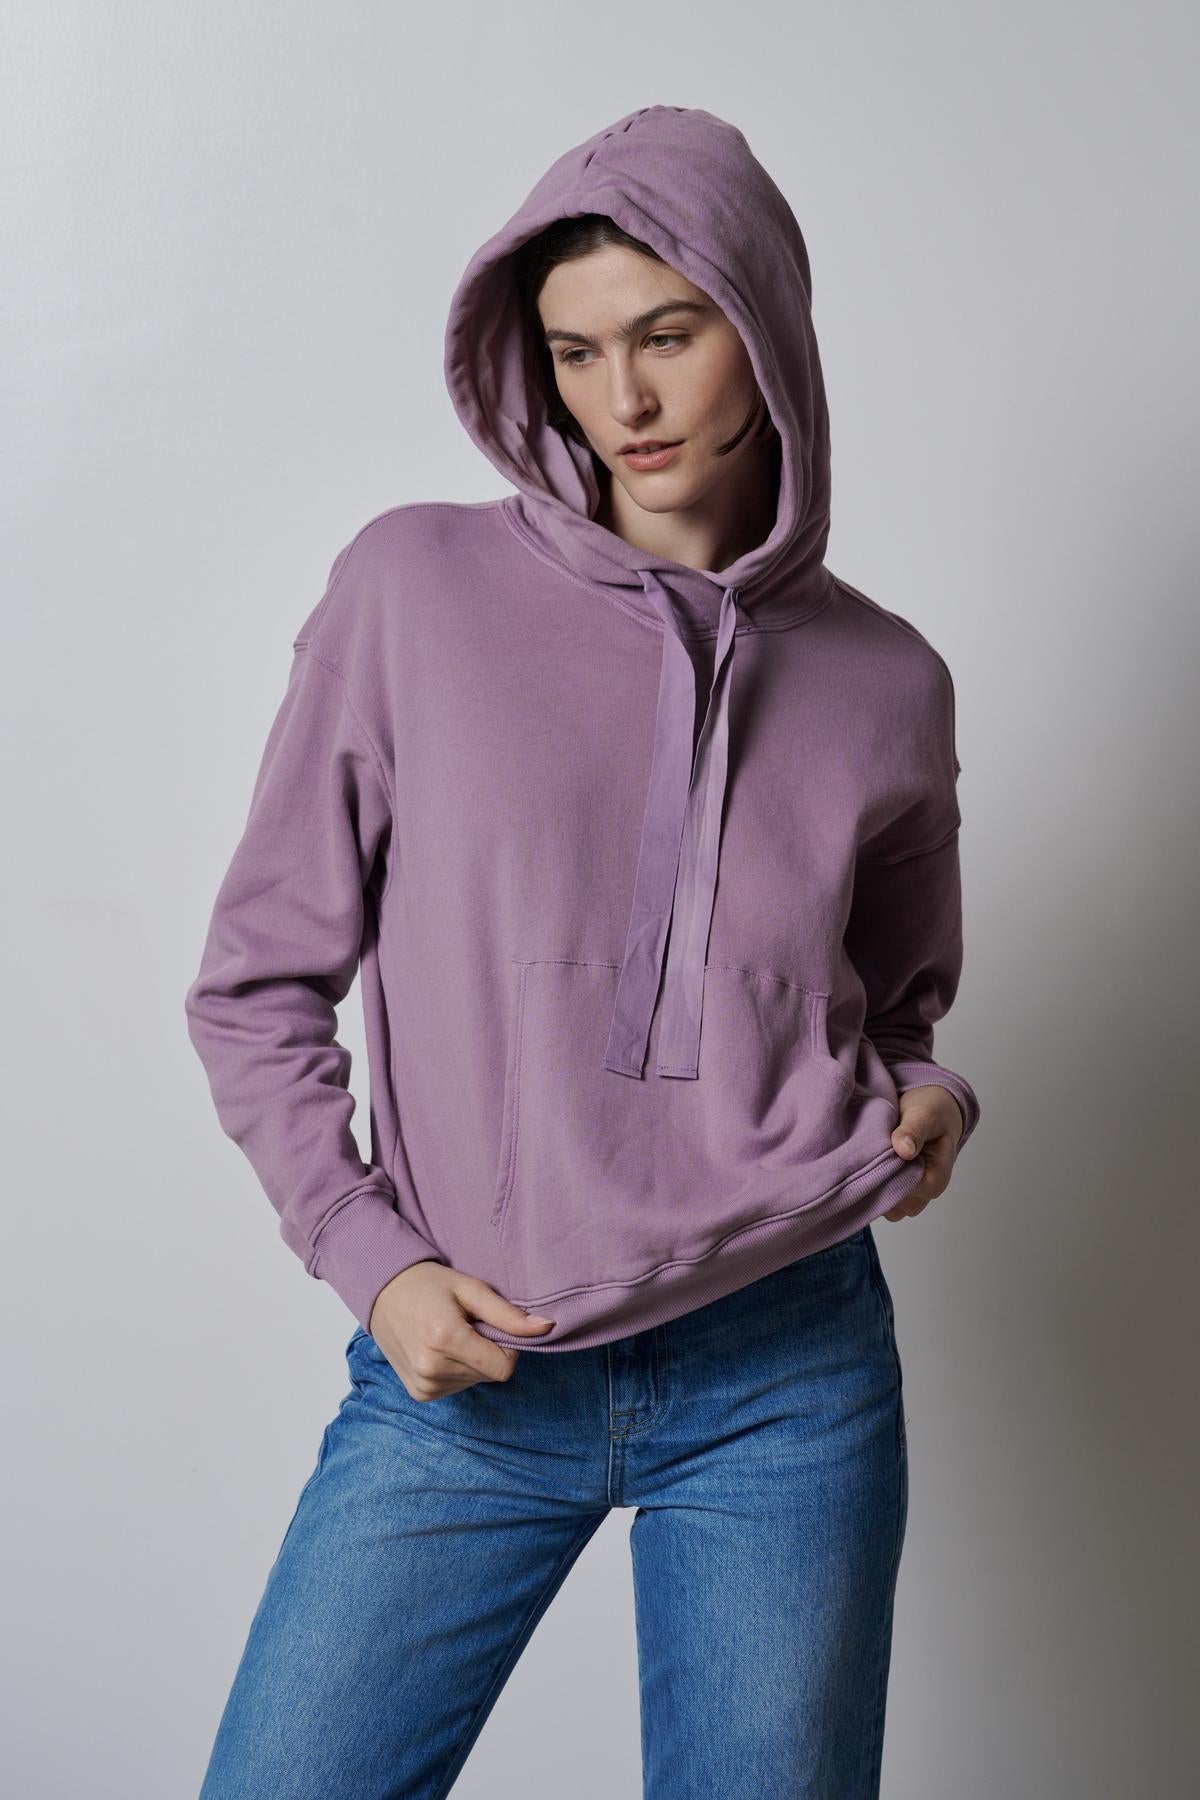   A woman wearing a OJAI HOODIE by Velvet by Jenny Graham and jeans. 